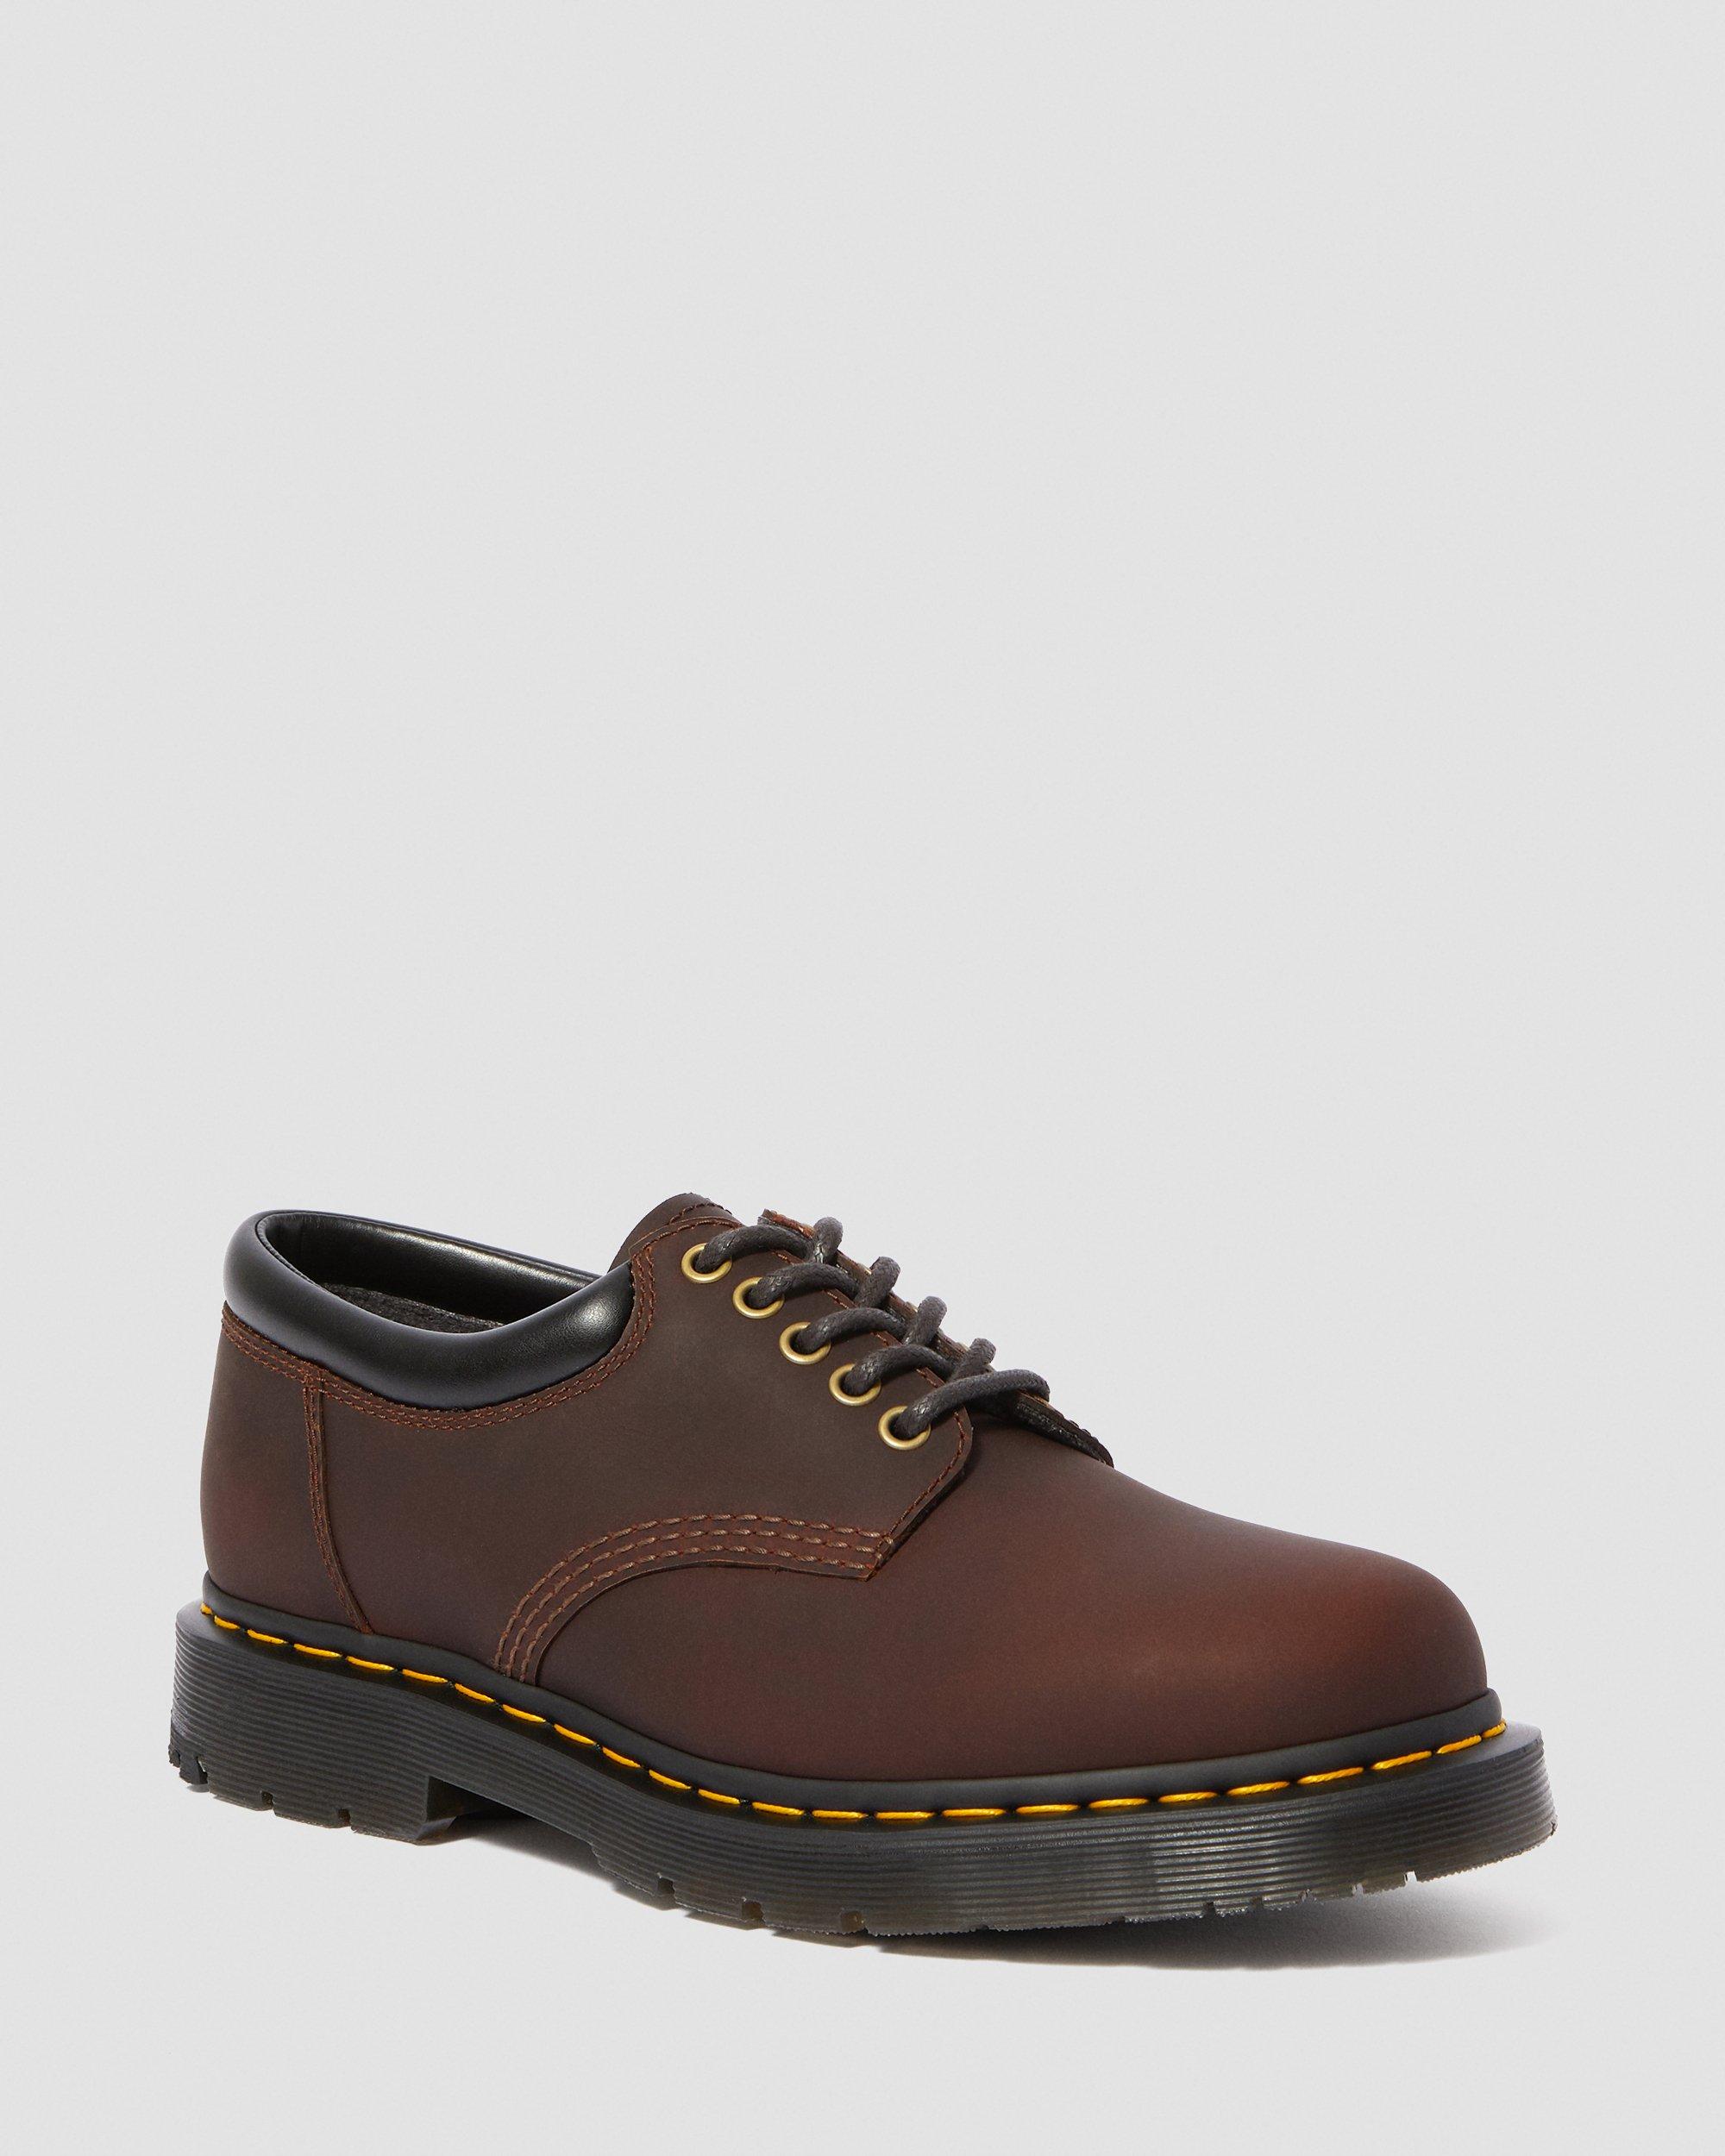 8053 DM'S WINTERGRIP PADDED COLLAR SHOES in Cocoa | Dr. Martens